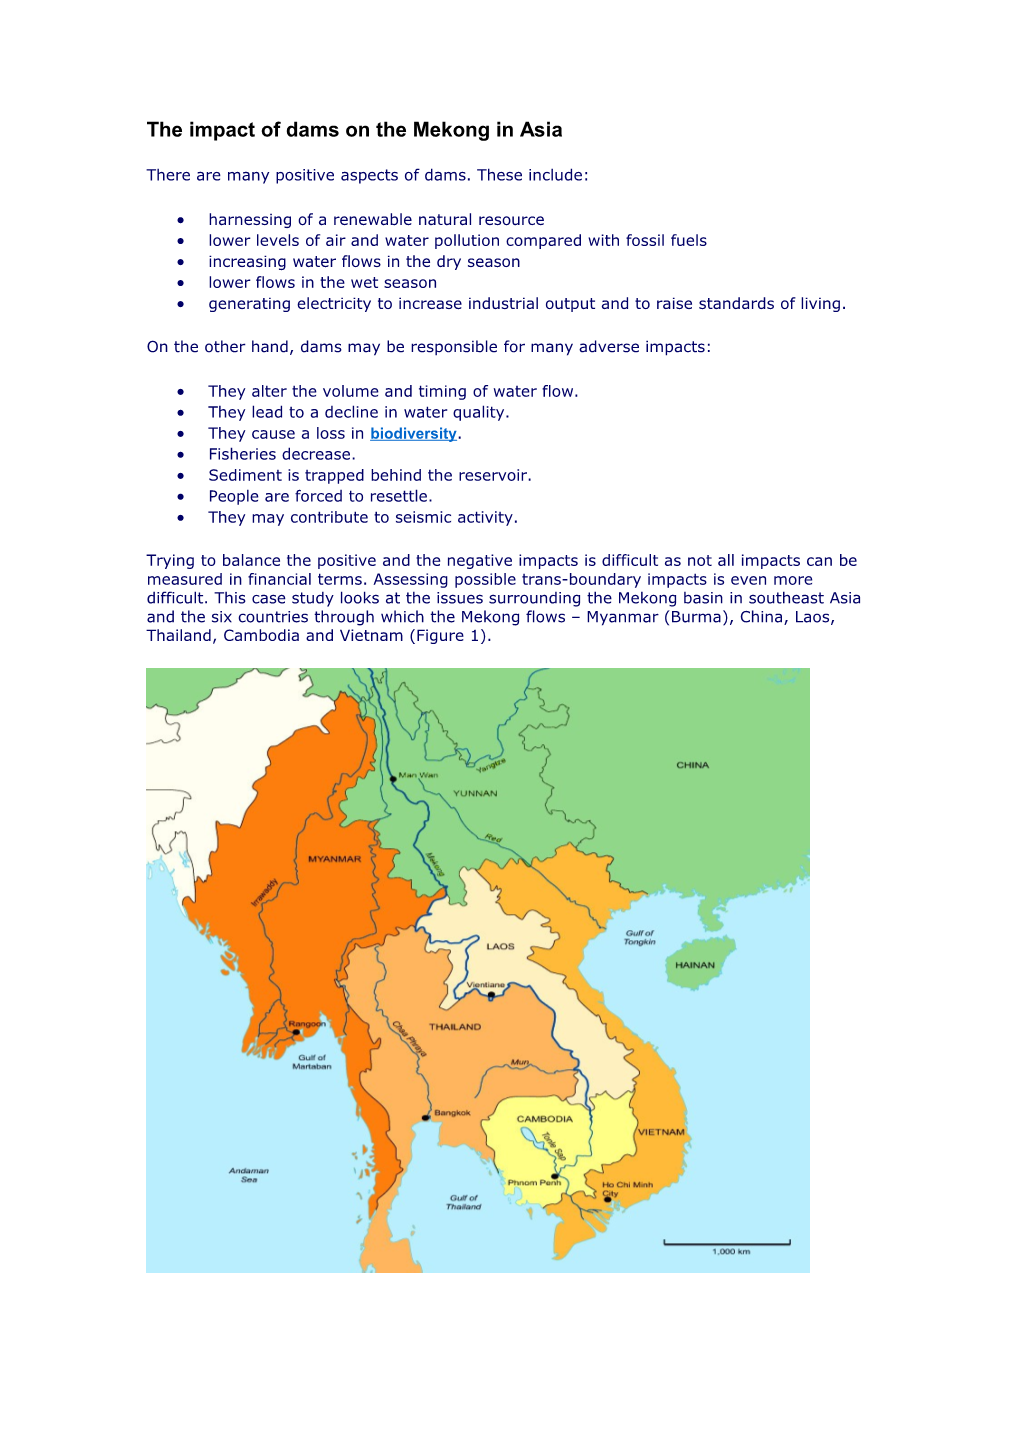 The Impact of Dams on the Mekong in Asia